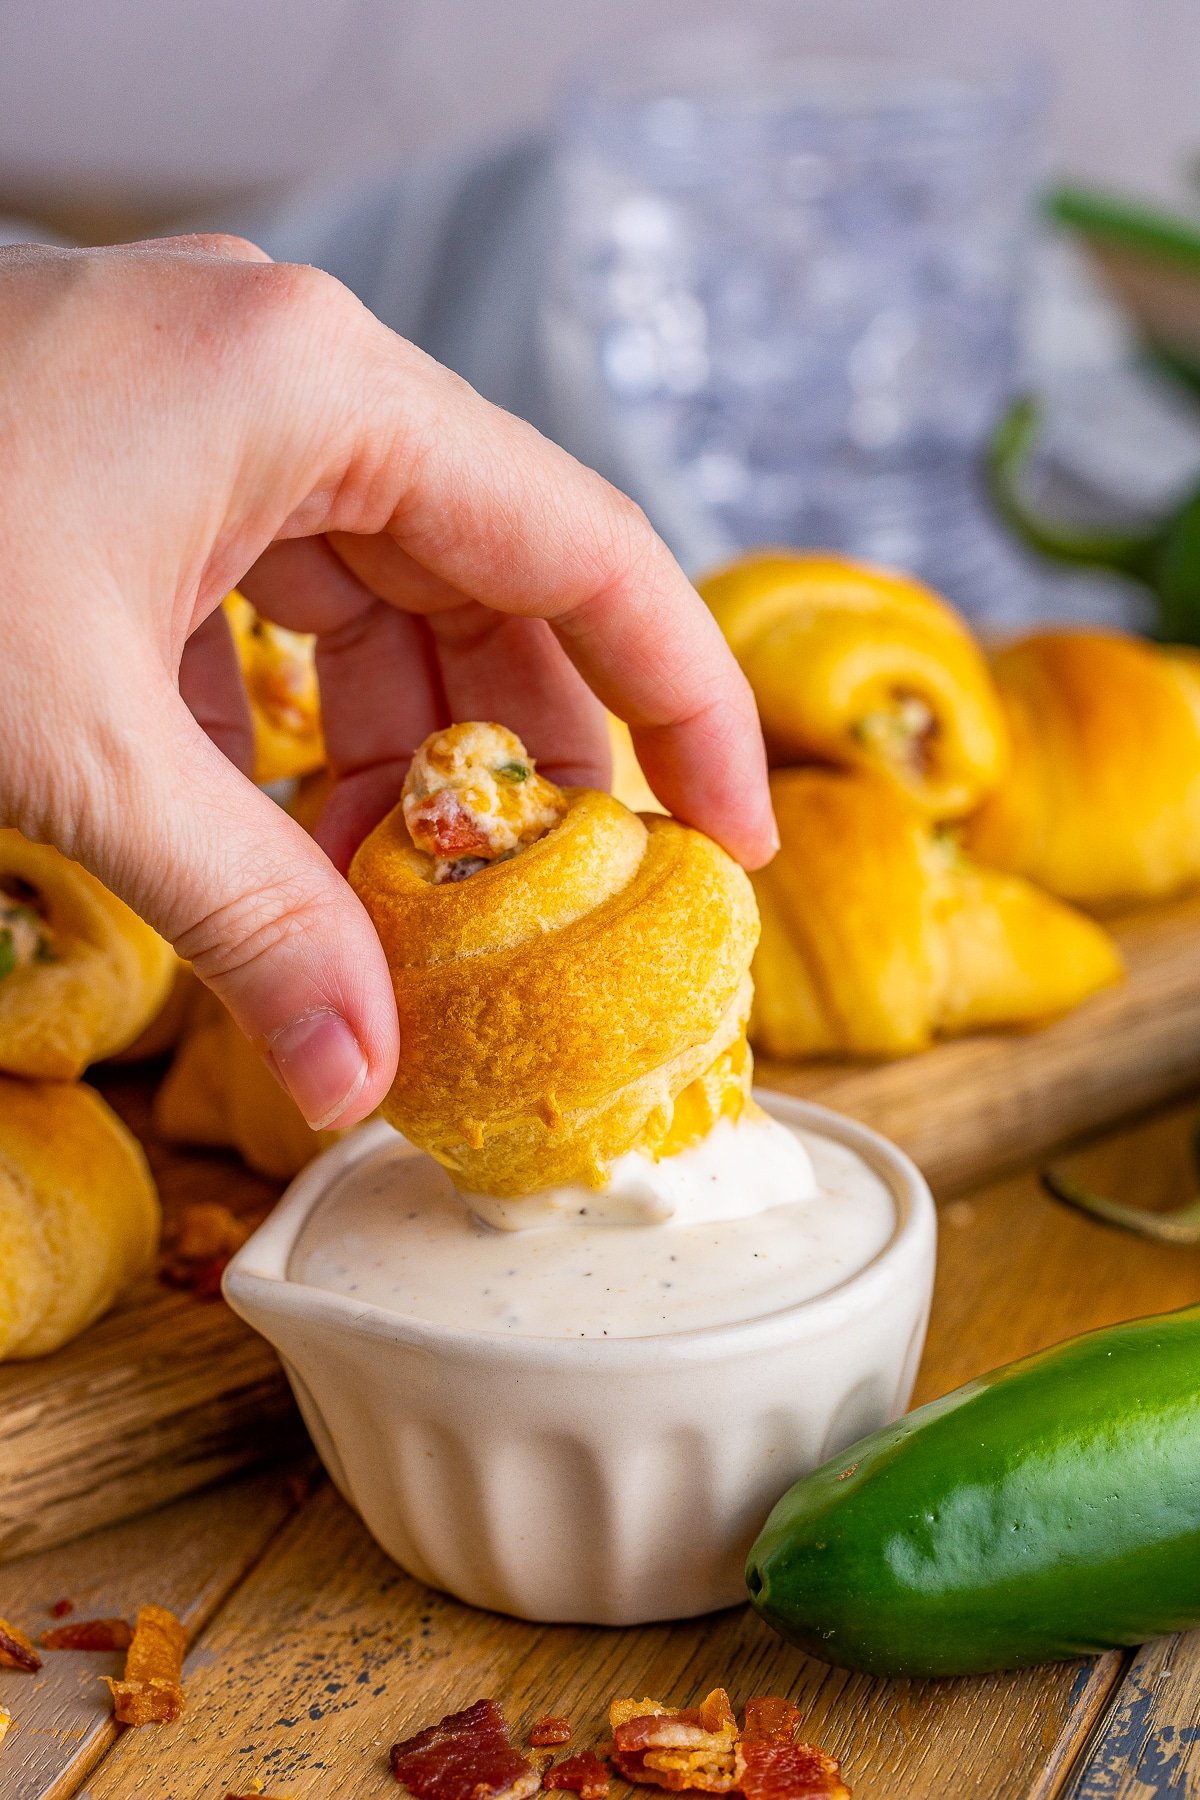 Hand dipping one of the Jalapeño Popper Crescent Rolls into ranch.